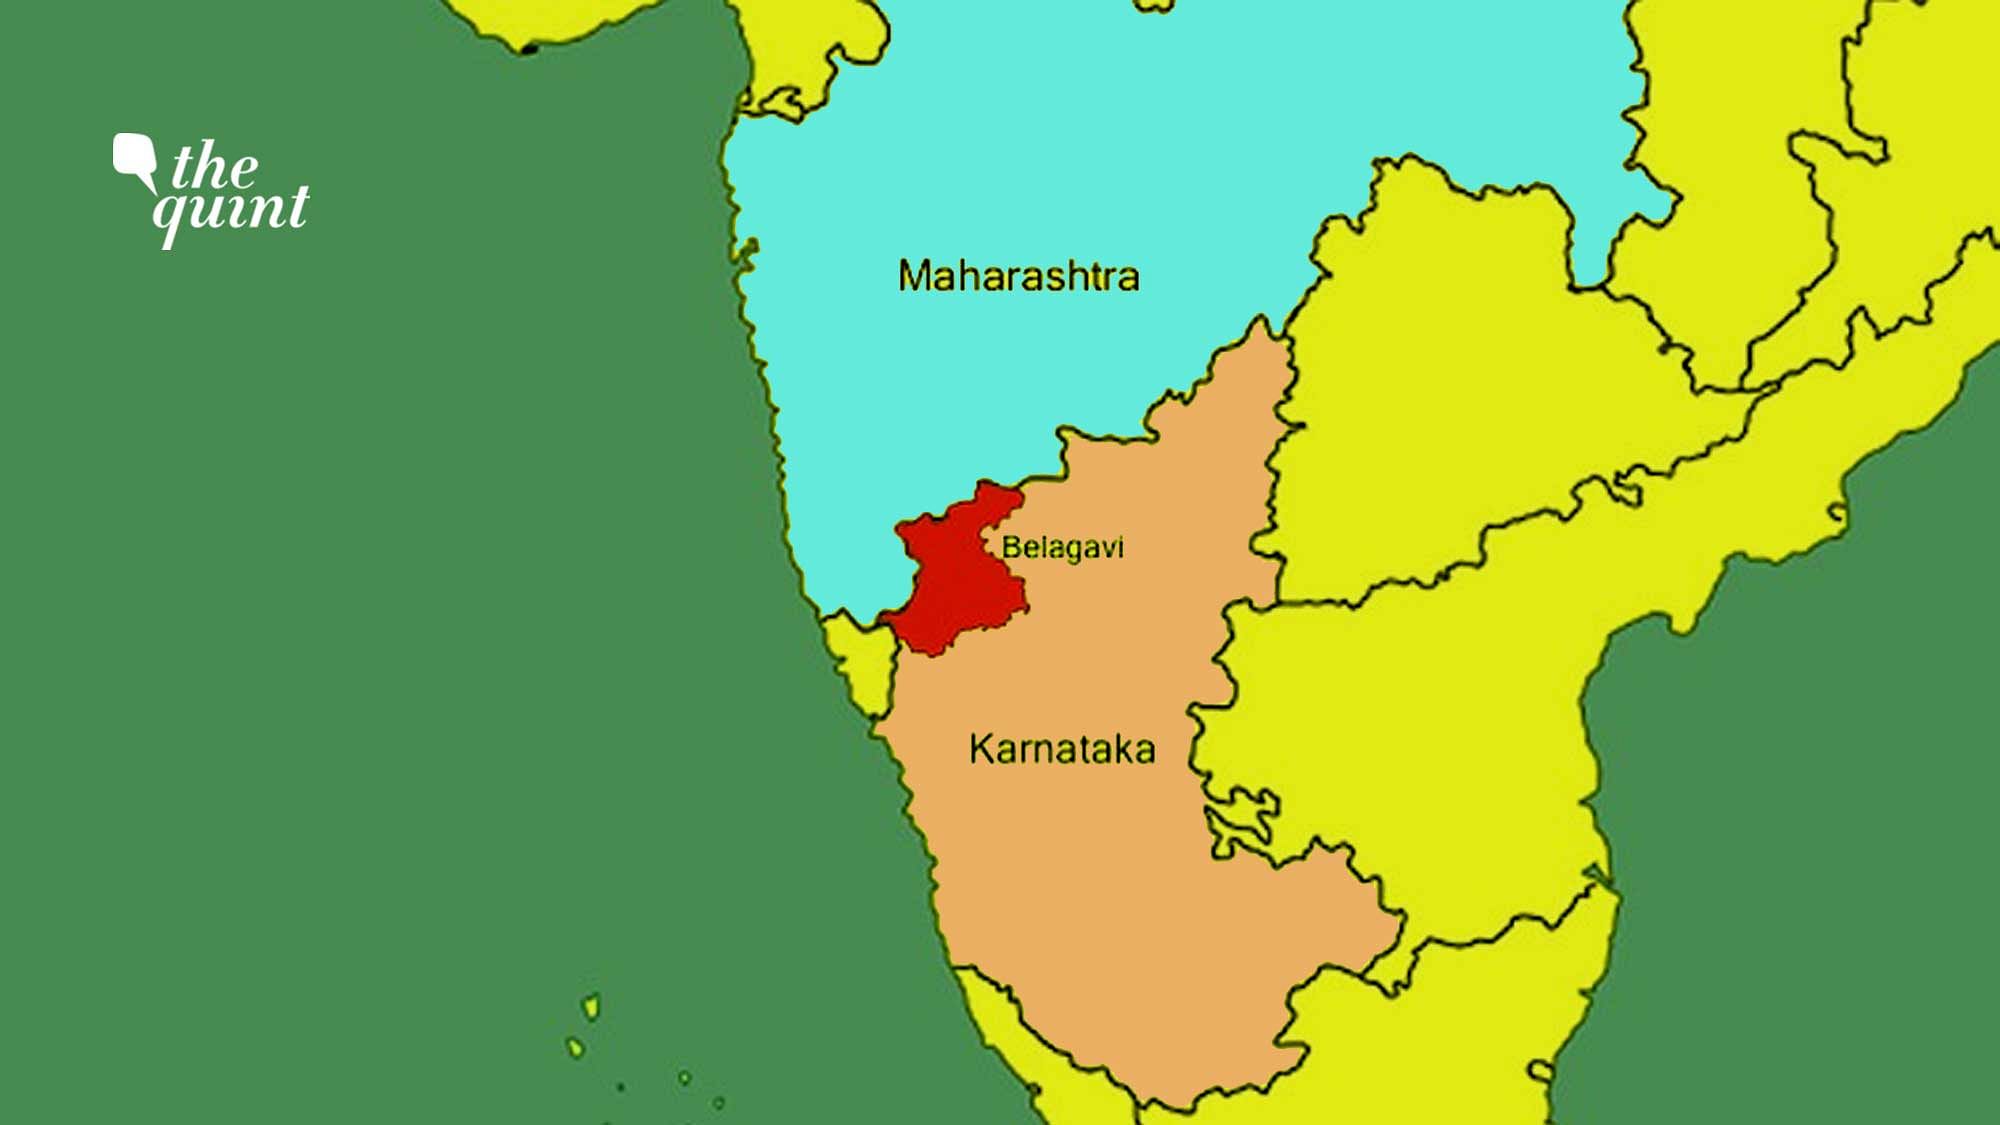 Karnataka Deputy CM suggested to Mumbai should be included in his state, amid war of words over border dispute.